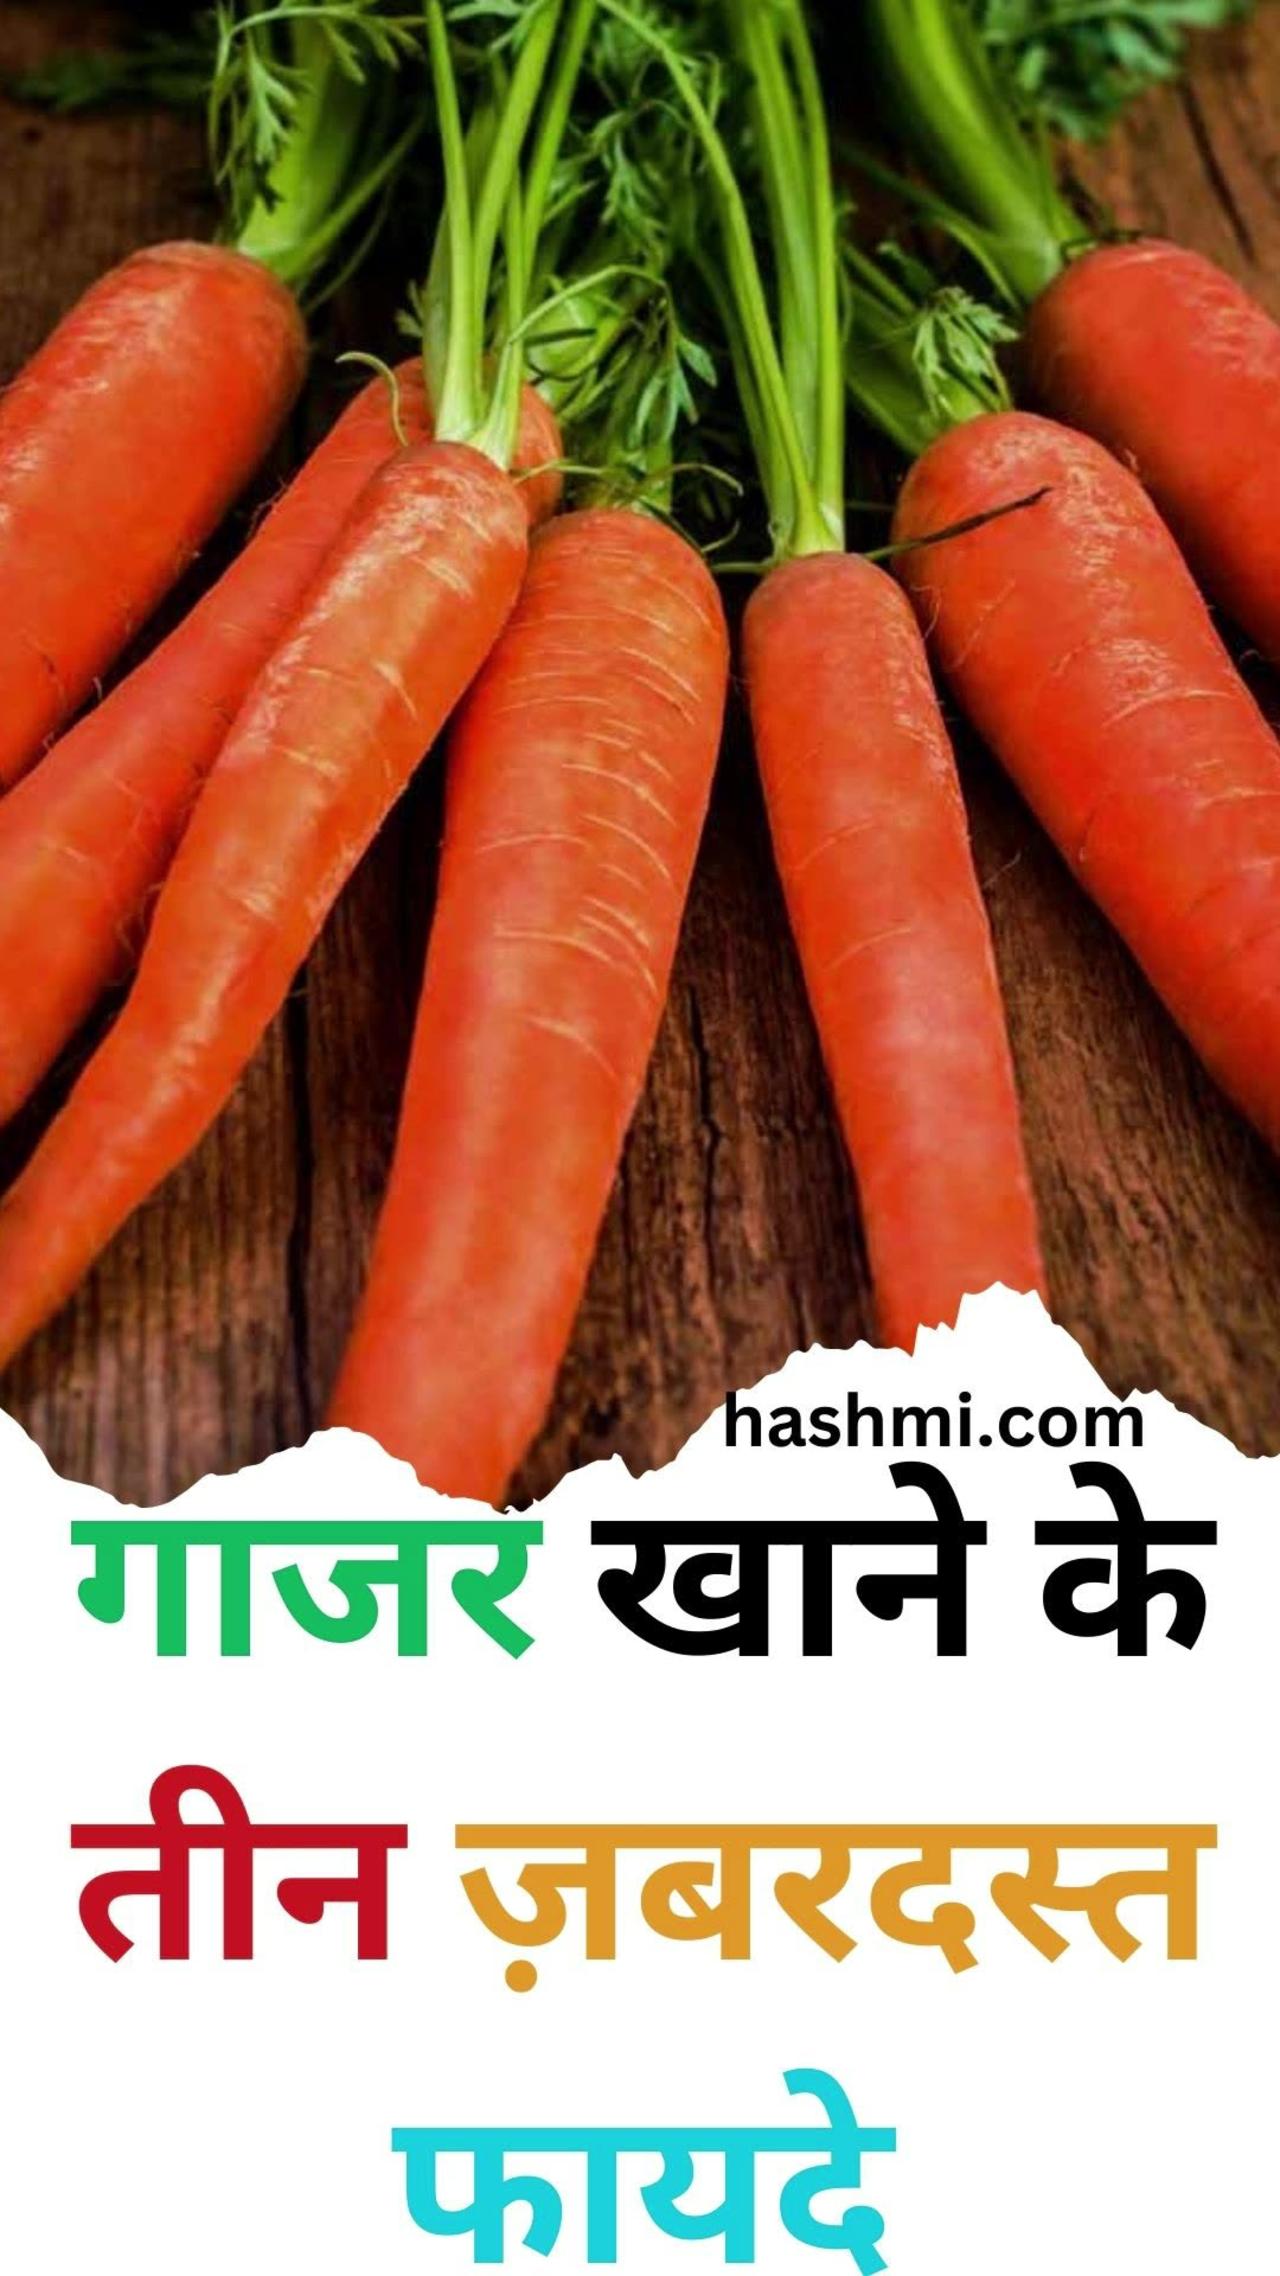 Three amazing benefits of eating carrots [Video]